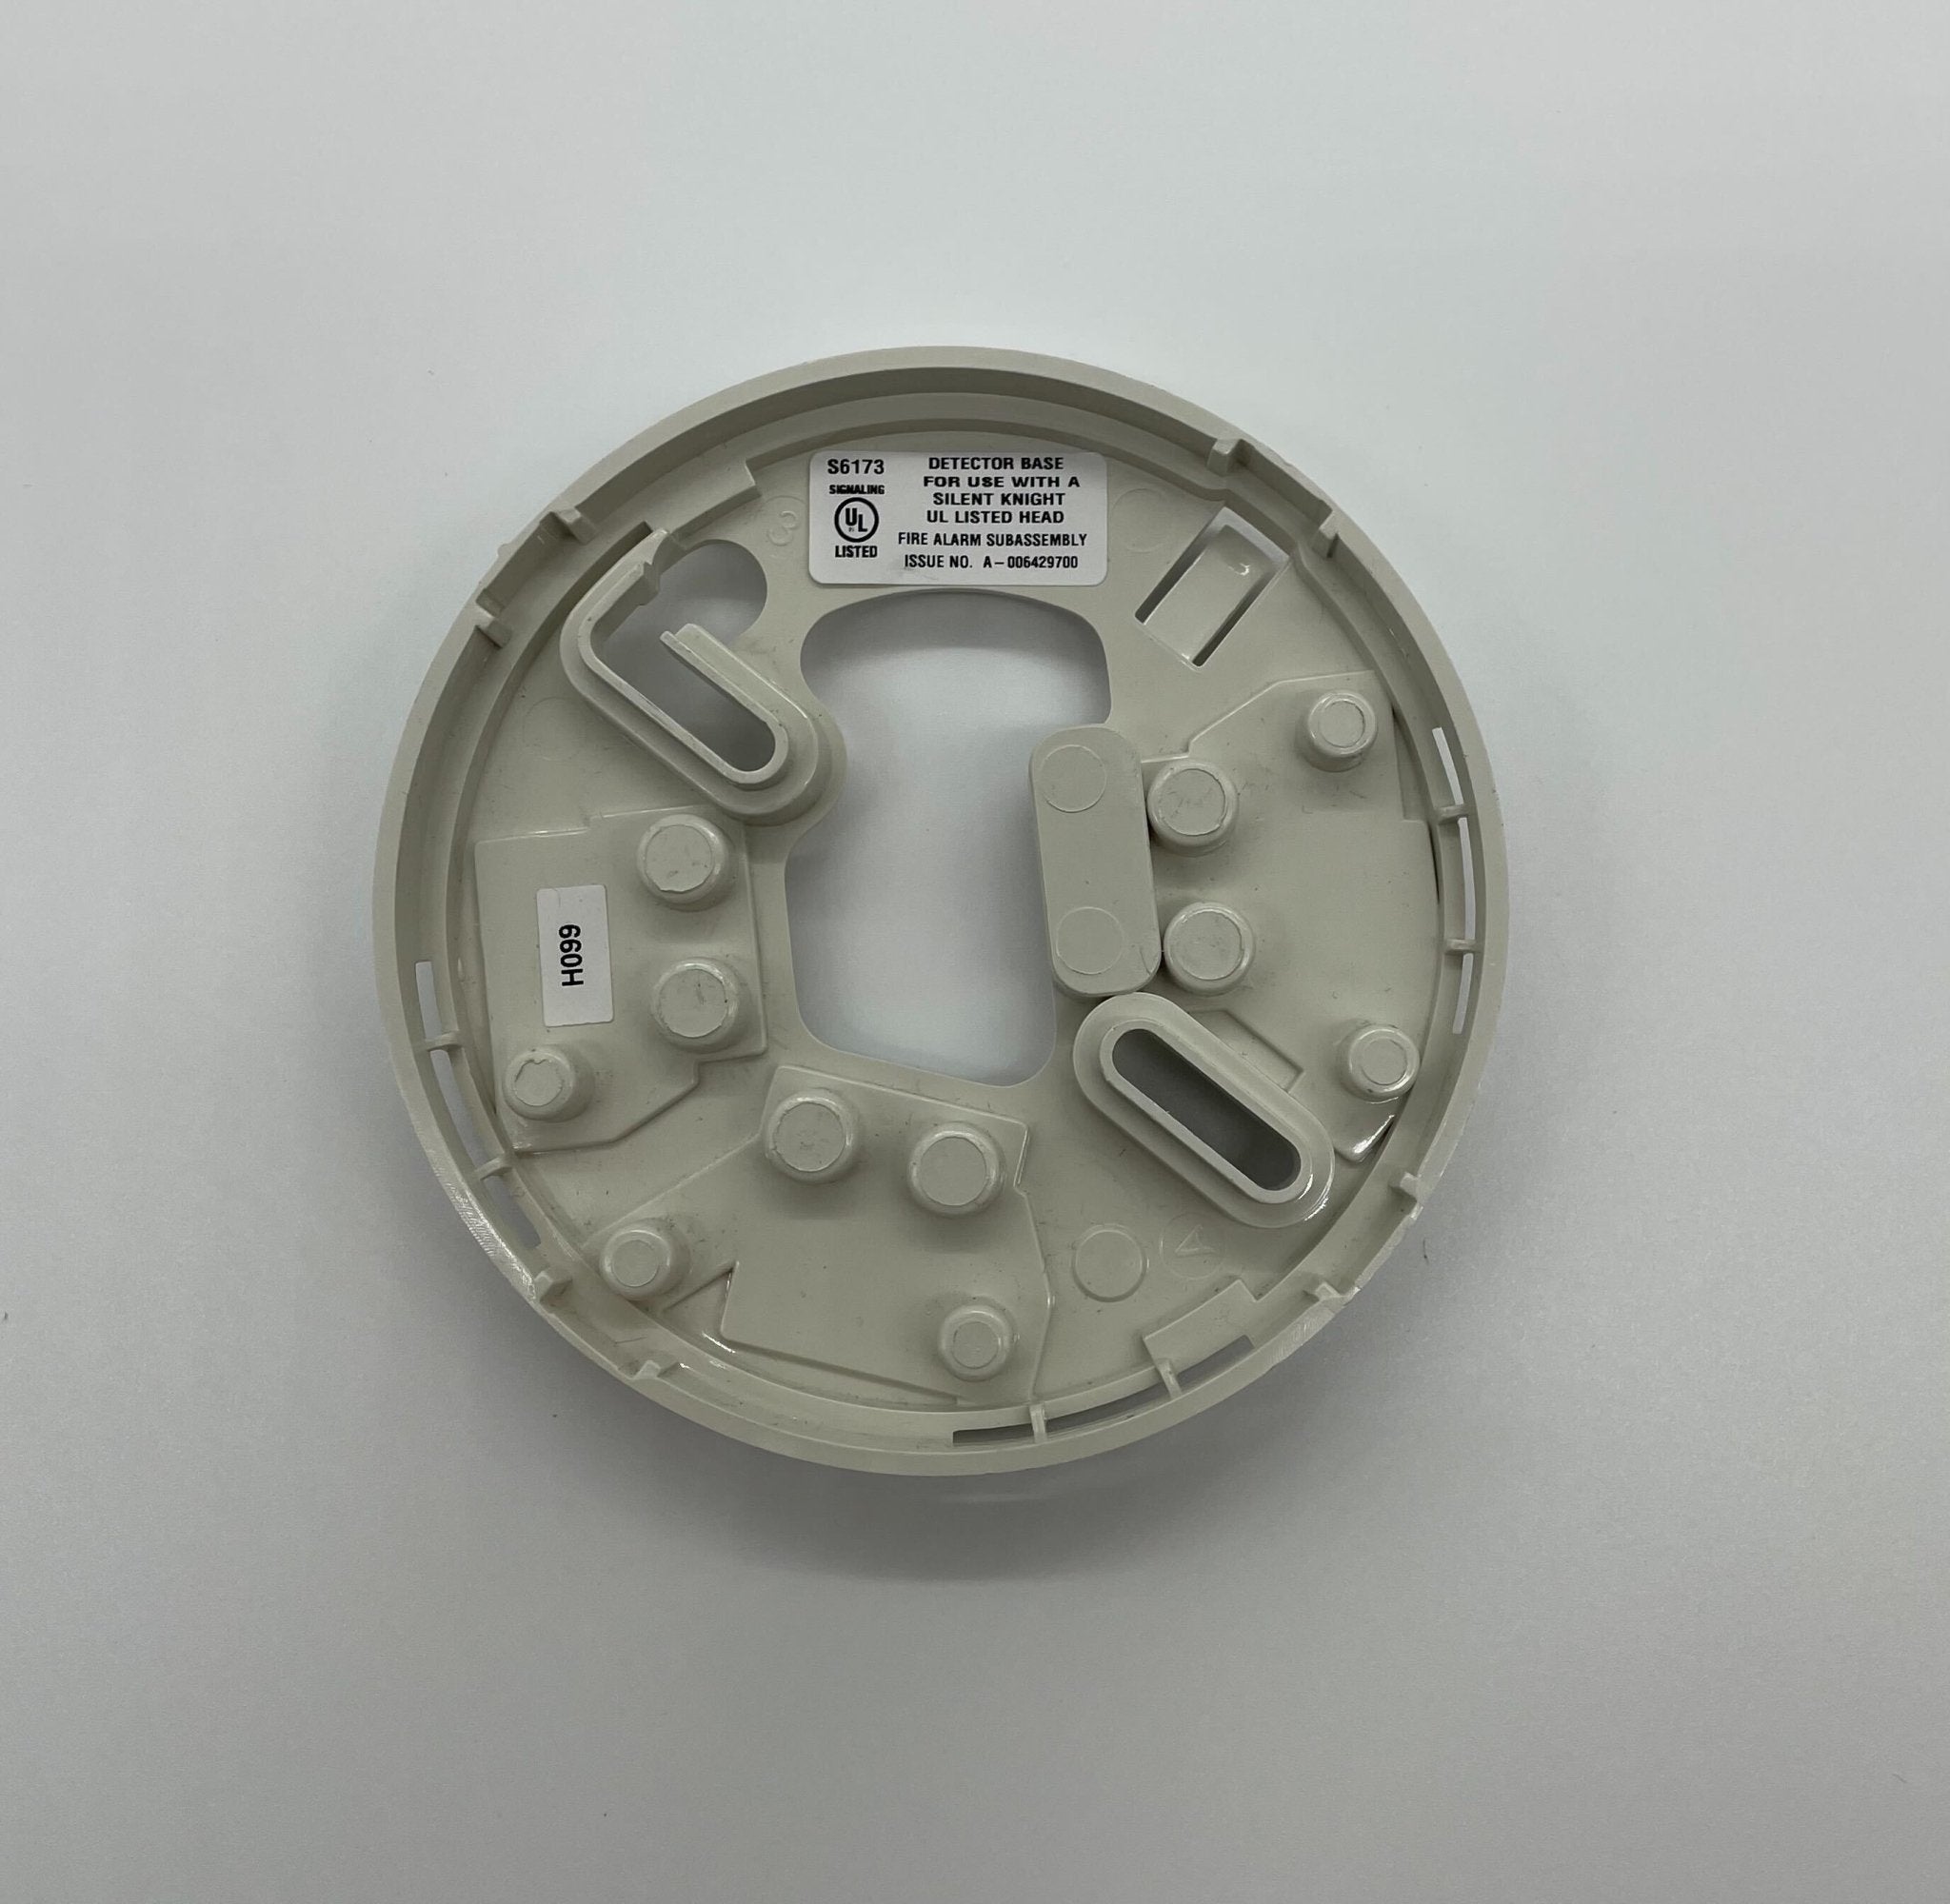 Silent Knight SD505-4AB - The Fire Alarm Supplier